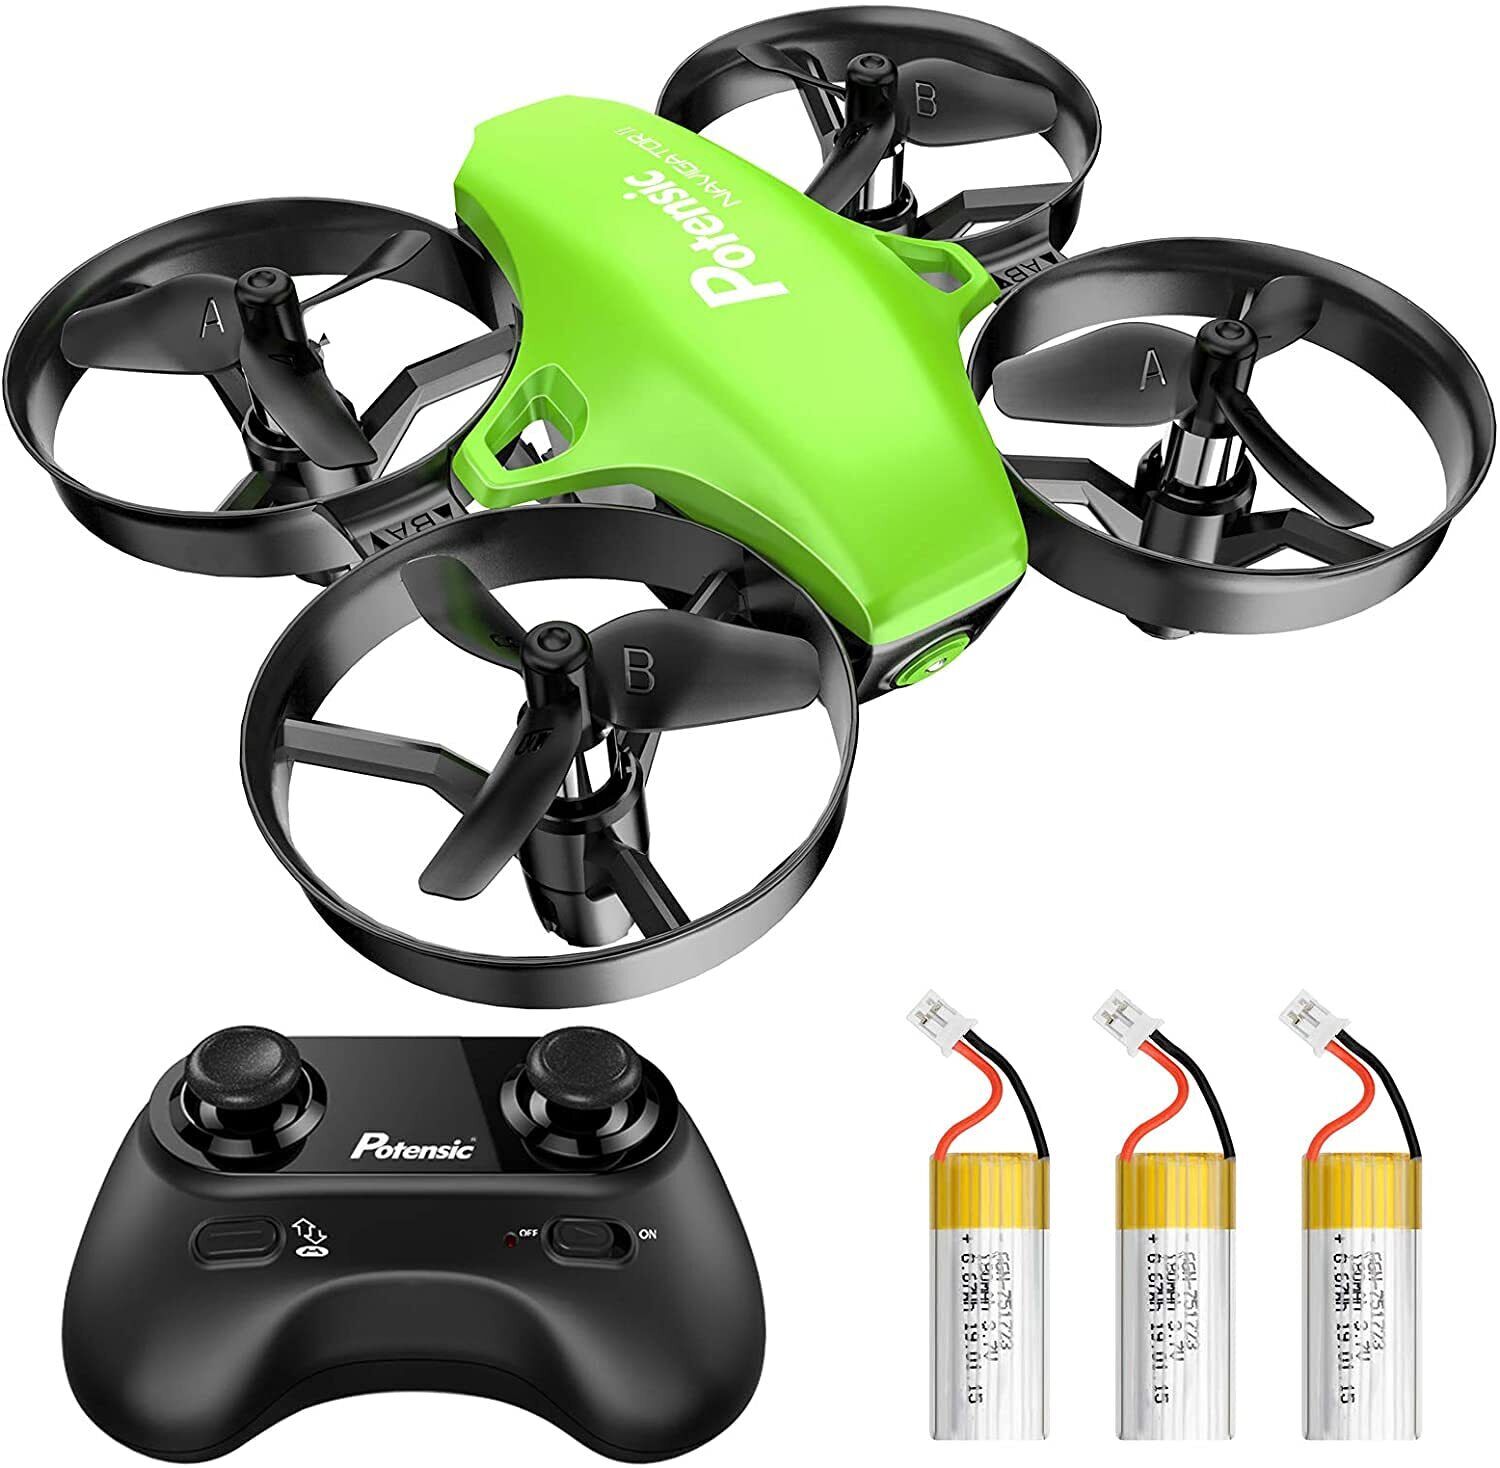 Drone for Children Potensic Mini Drone Less than 100g Toy Drone with 3 Batteries